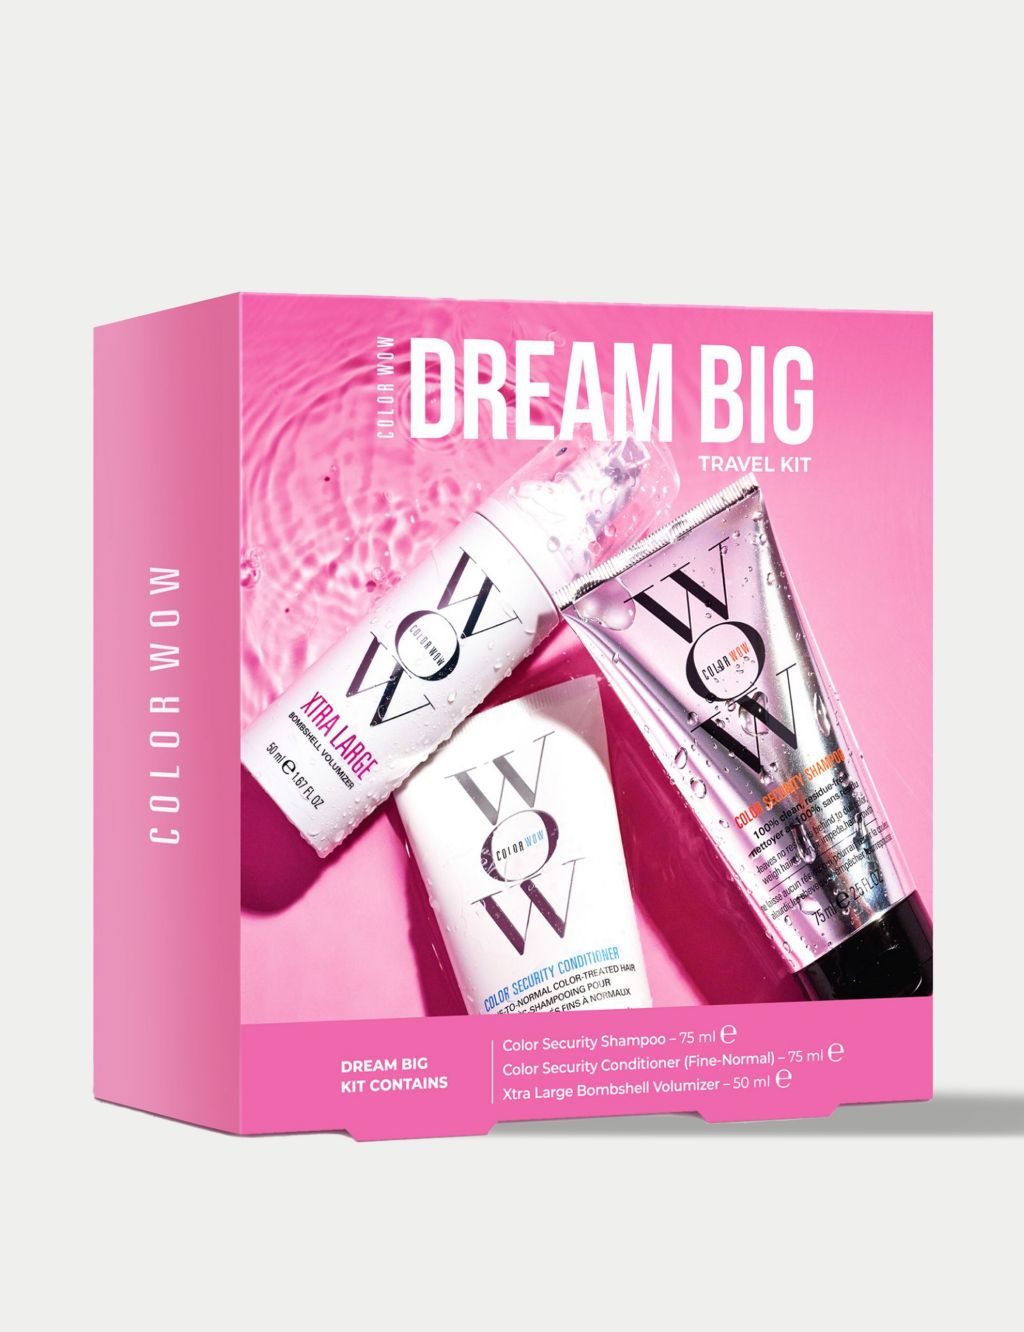 Color Wow Color Wow Dream Smooth Kit